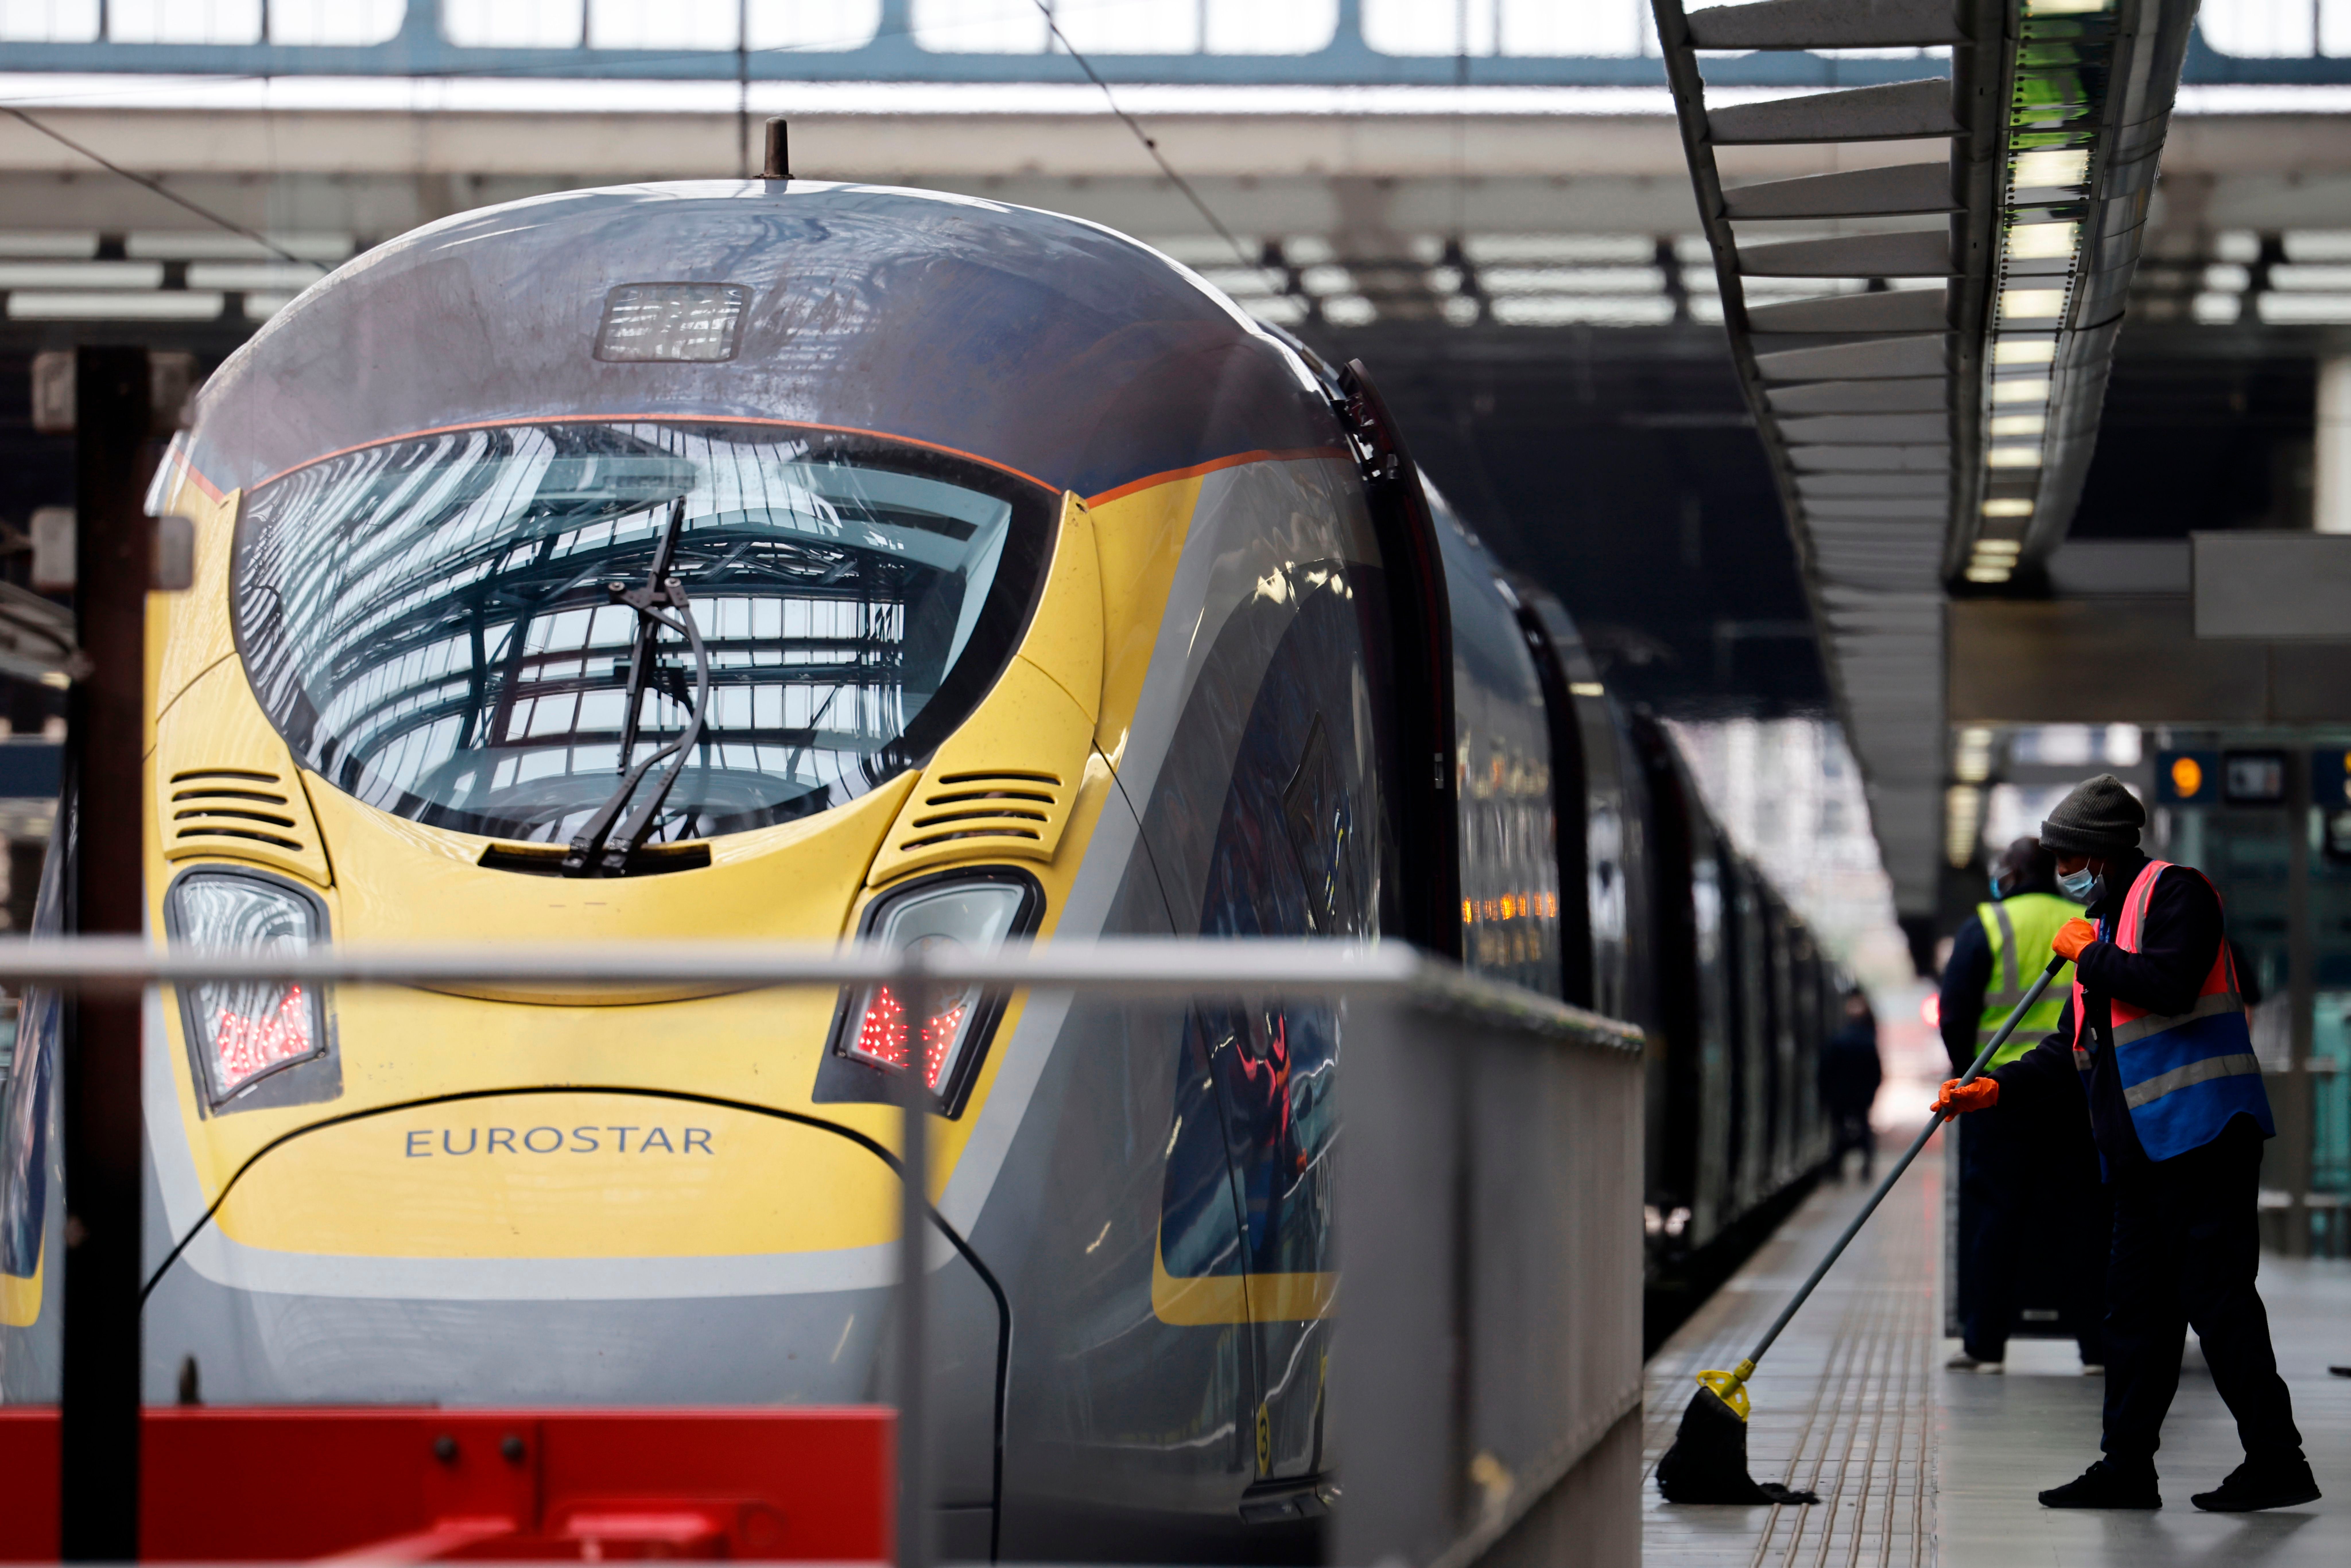 Eurostar operates high-speed rail services between London and Paris, Brussels, Lille, Amsterdam and Rotterdam.